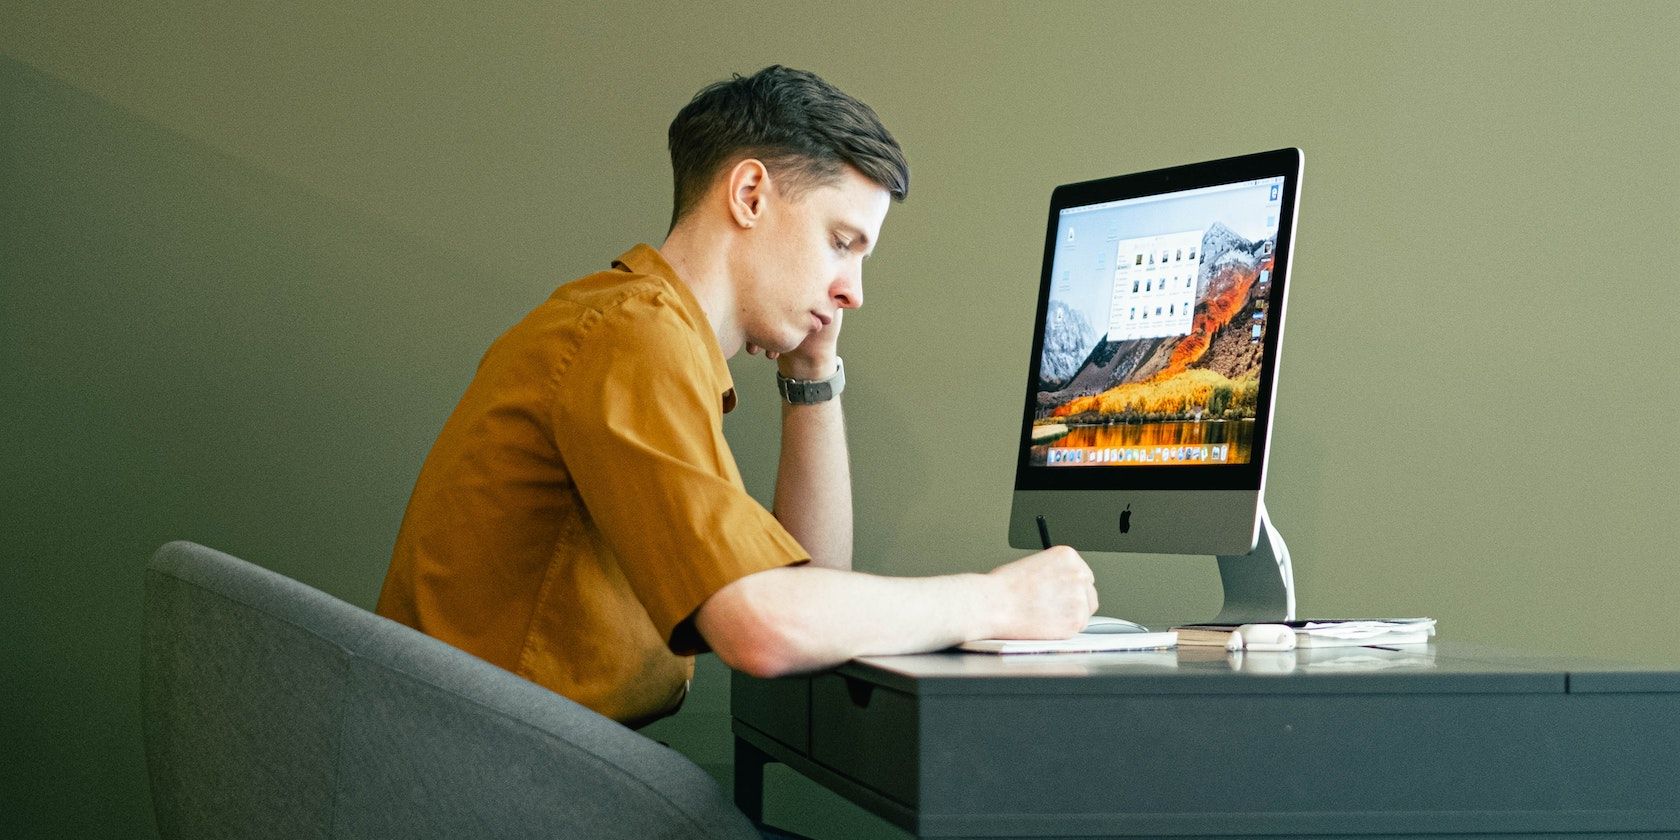 Man writing in a notebook while sitting in front of an iMac